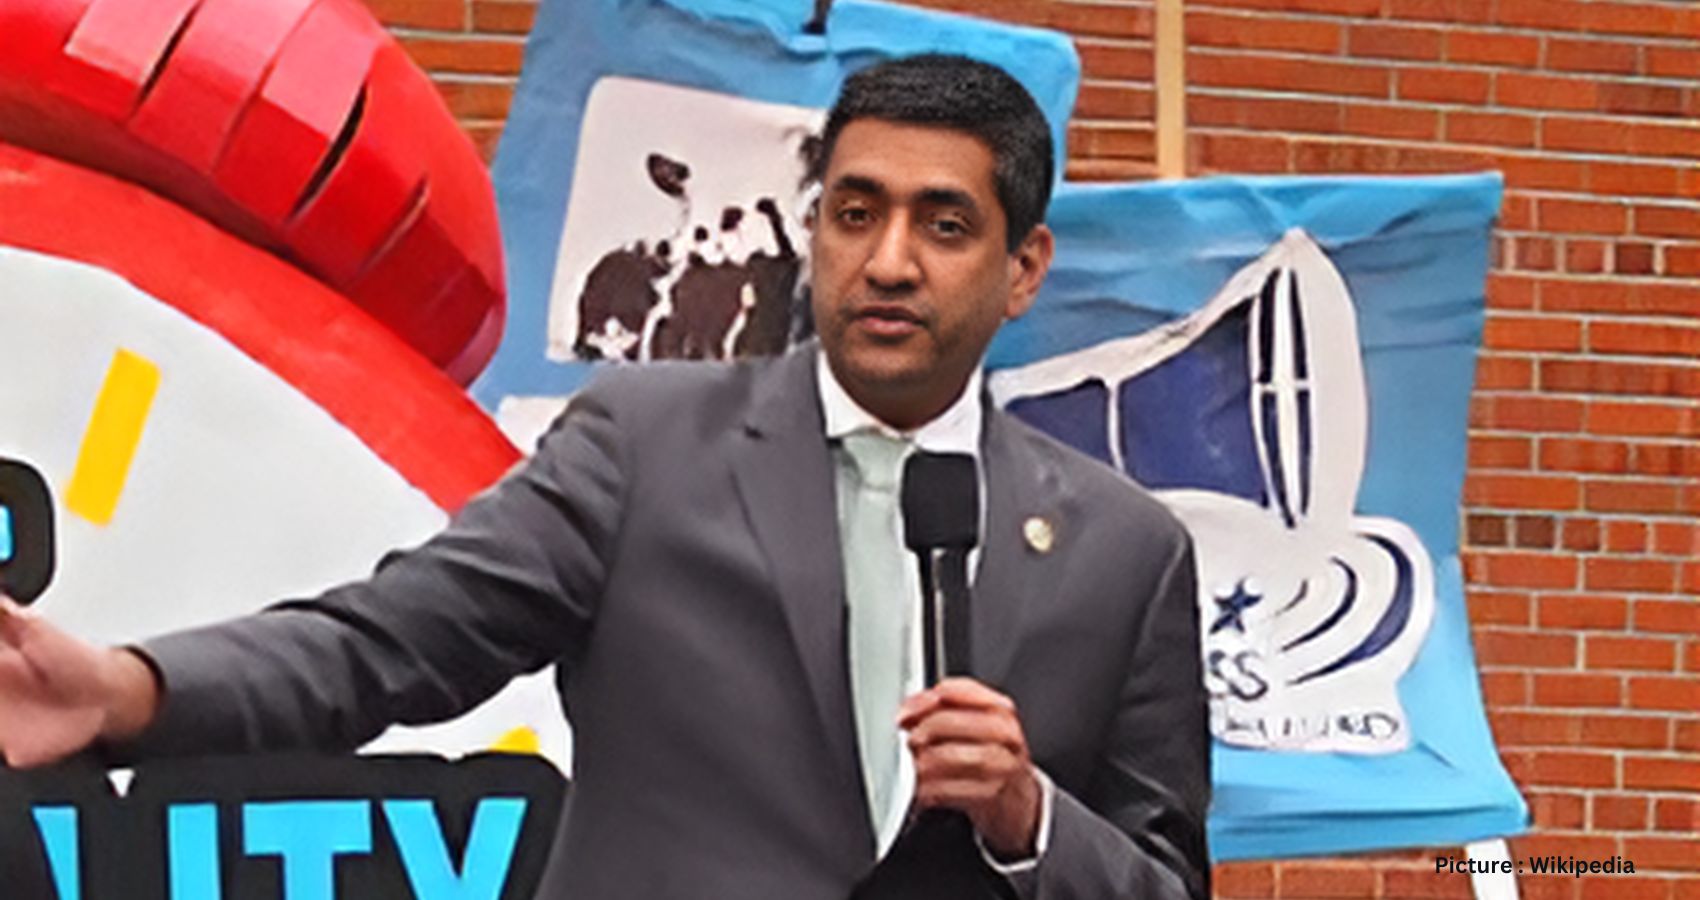 Ro Khanna Advocates Constructive Dialogue for India-US Relations, Speculation Arises on Presidential Run